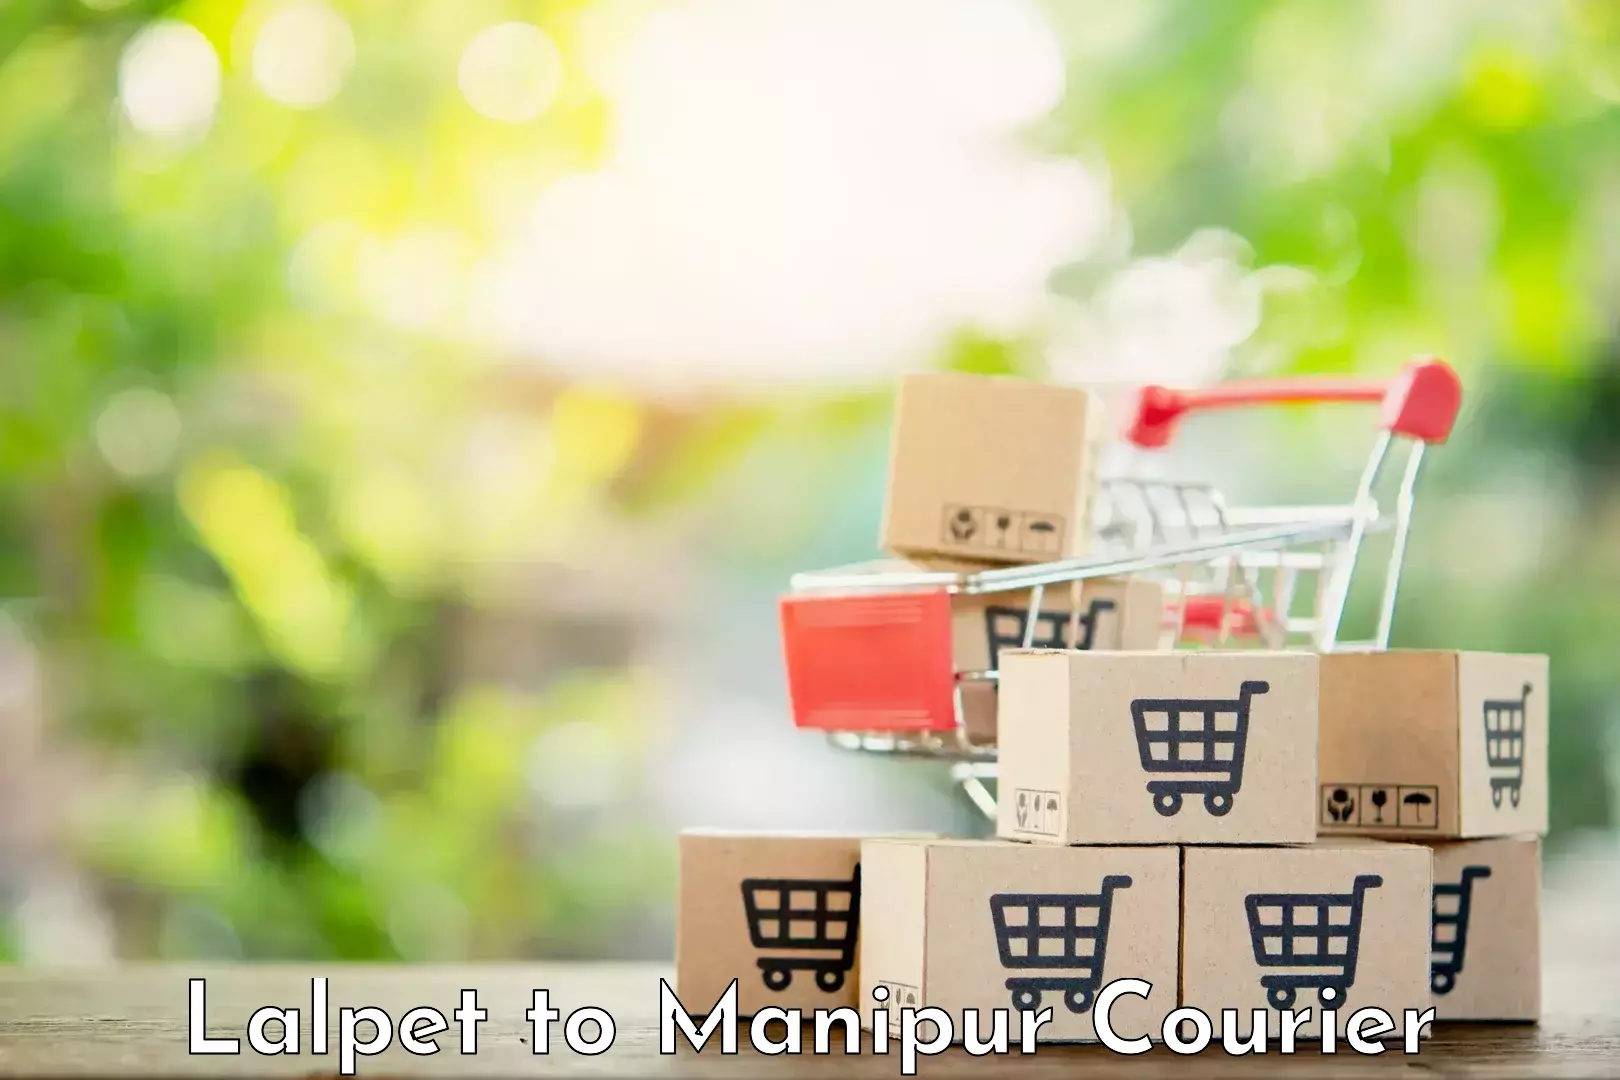 Parcel handling and care in Lalpet to Manipur